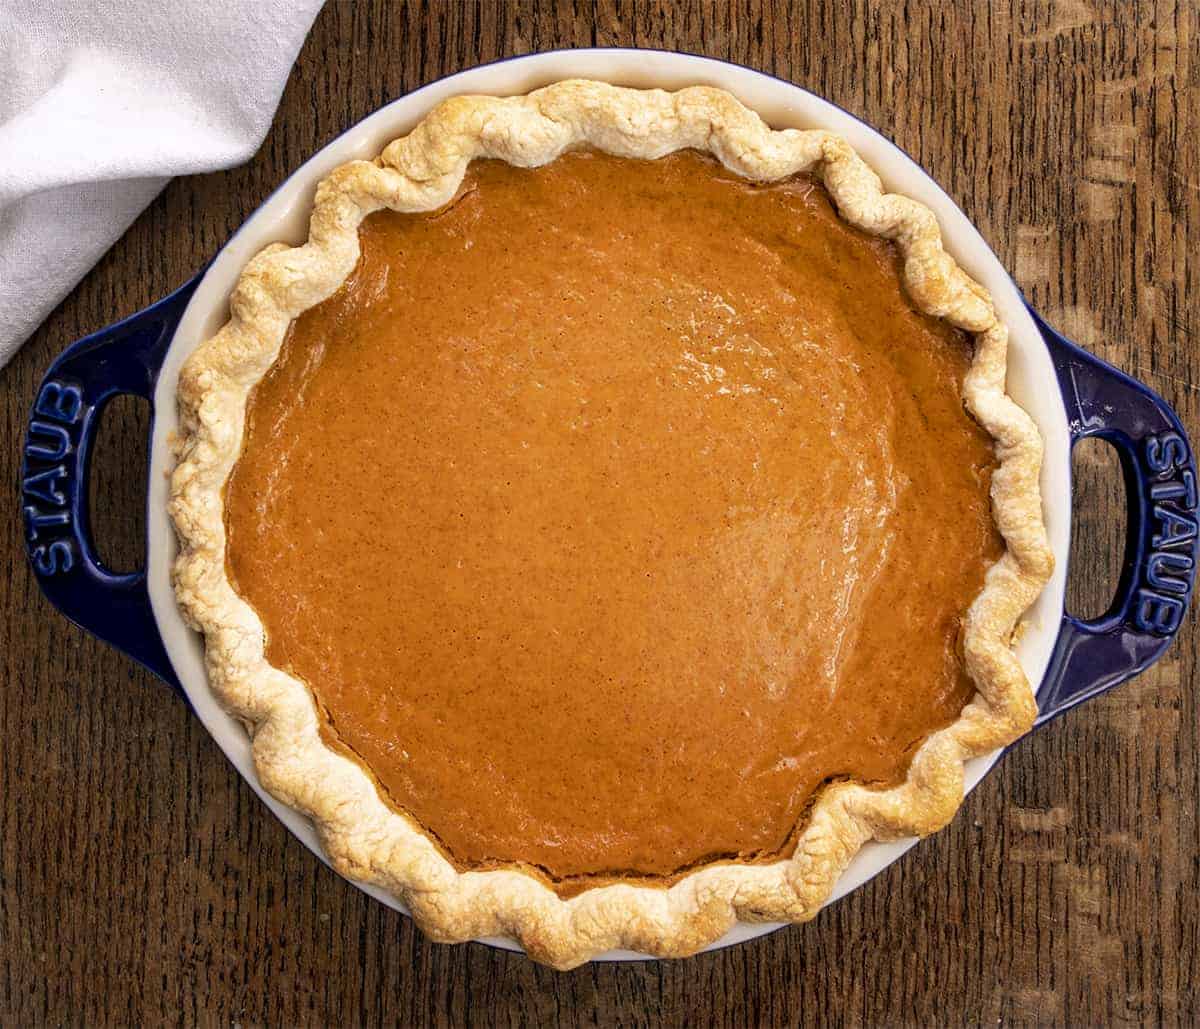 How To Store Pumpkin Pie After Baking